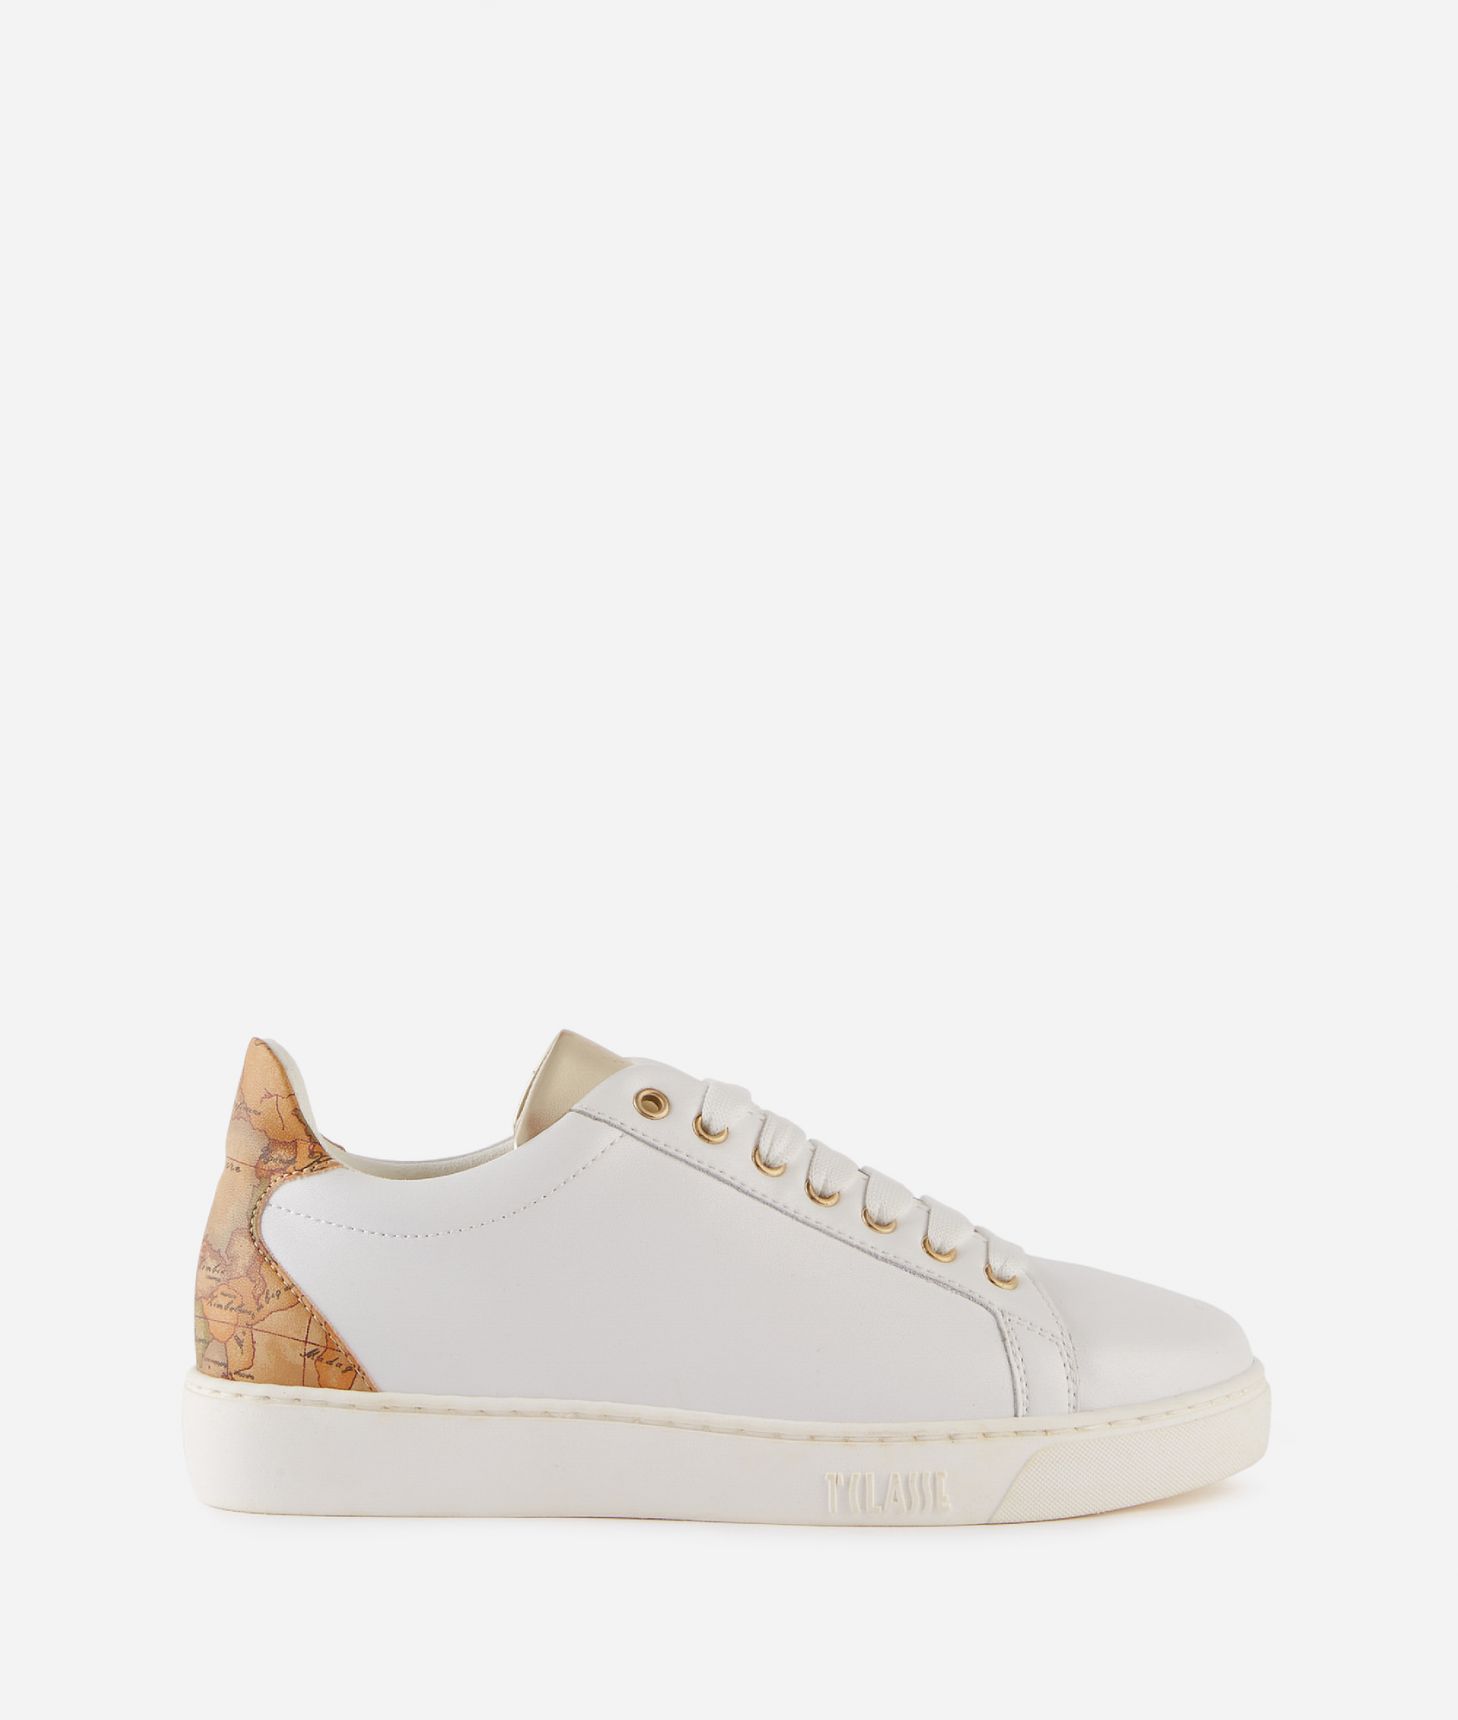 Sneakers in pelle liscia Bianche,front